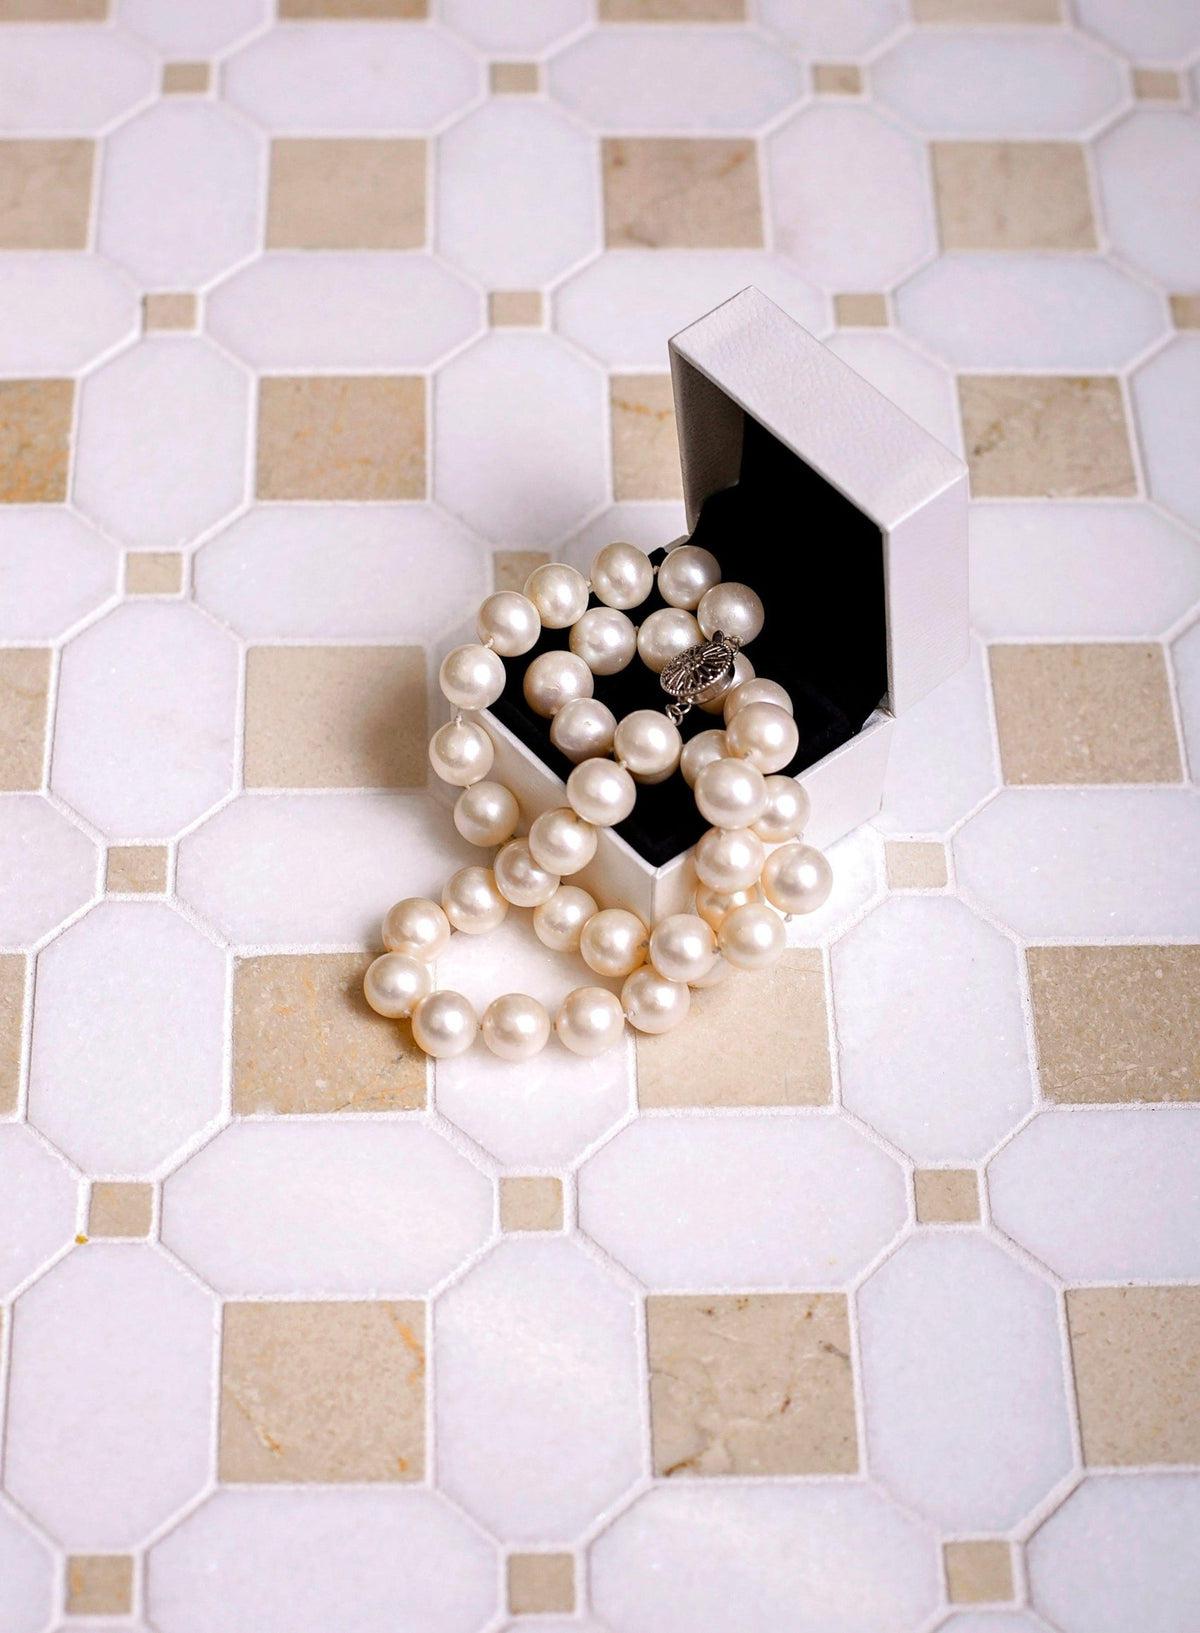 Crema Marfil Square And Thassos Octagon Marble Mosaic Tile